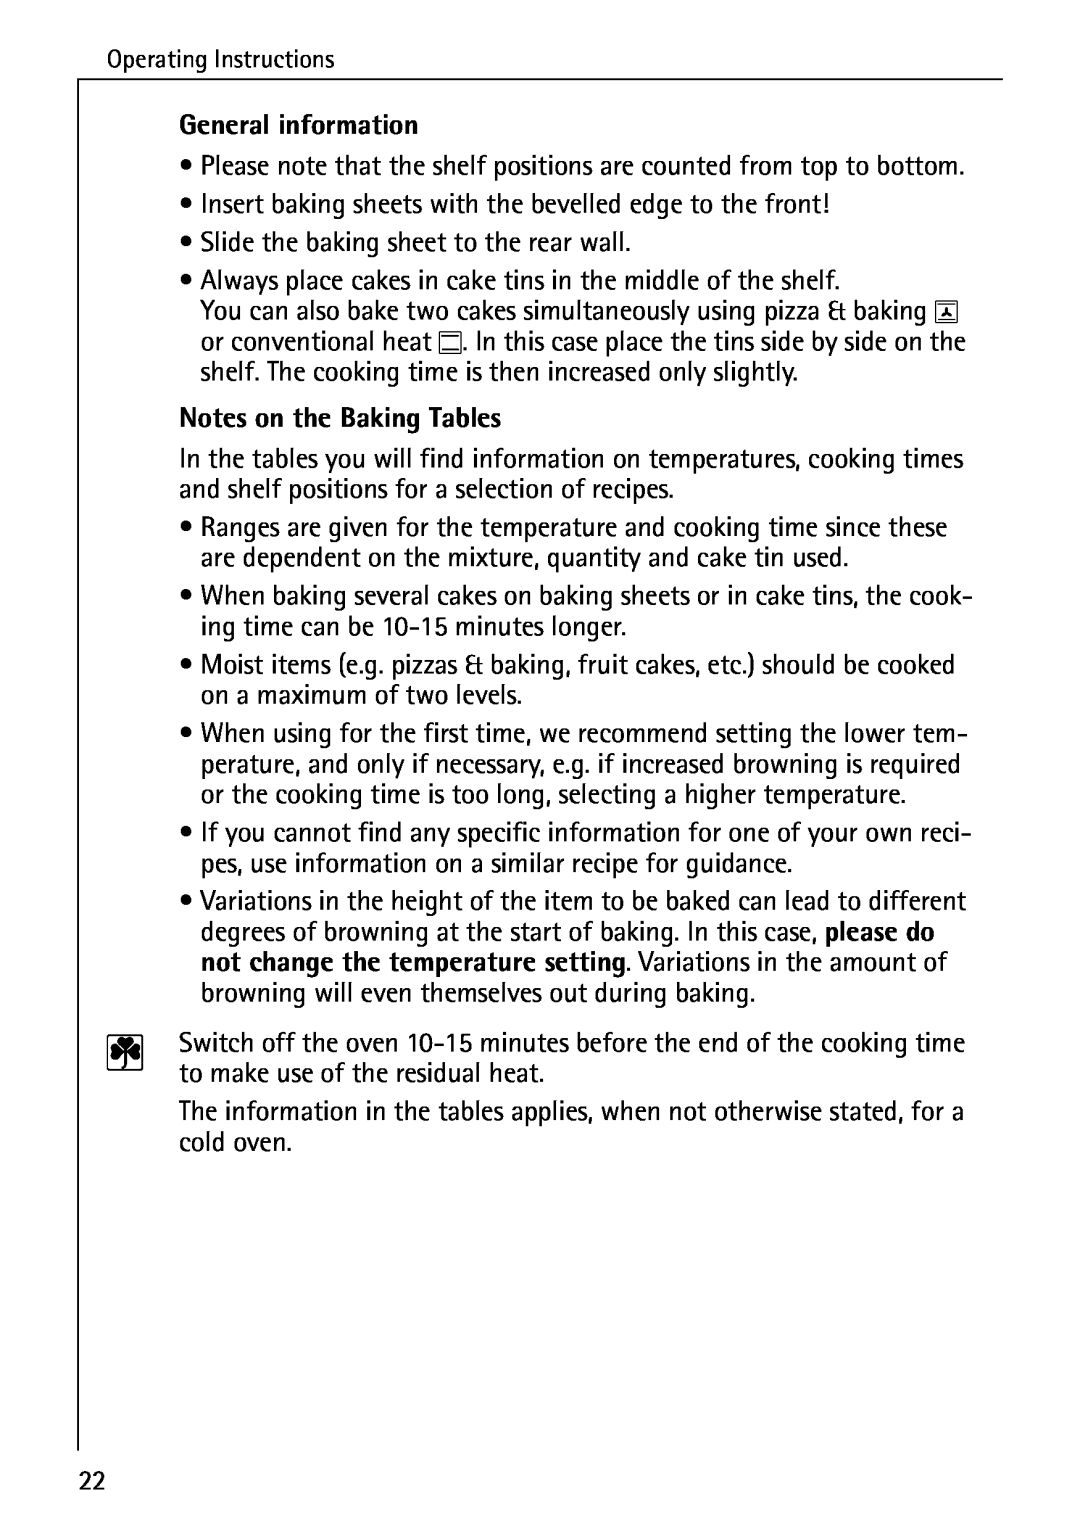 AEG B 4130 manual General information, Notes on the Baking Tables 